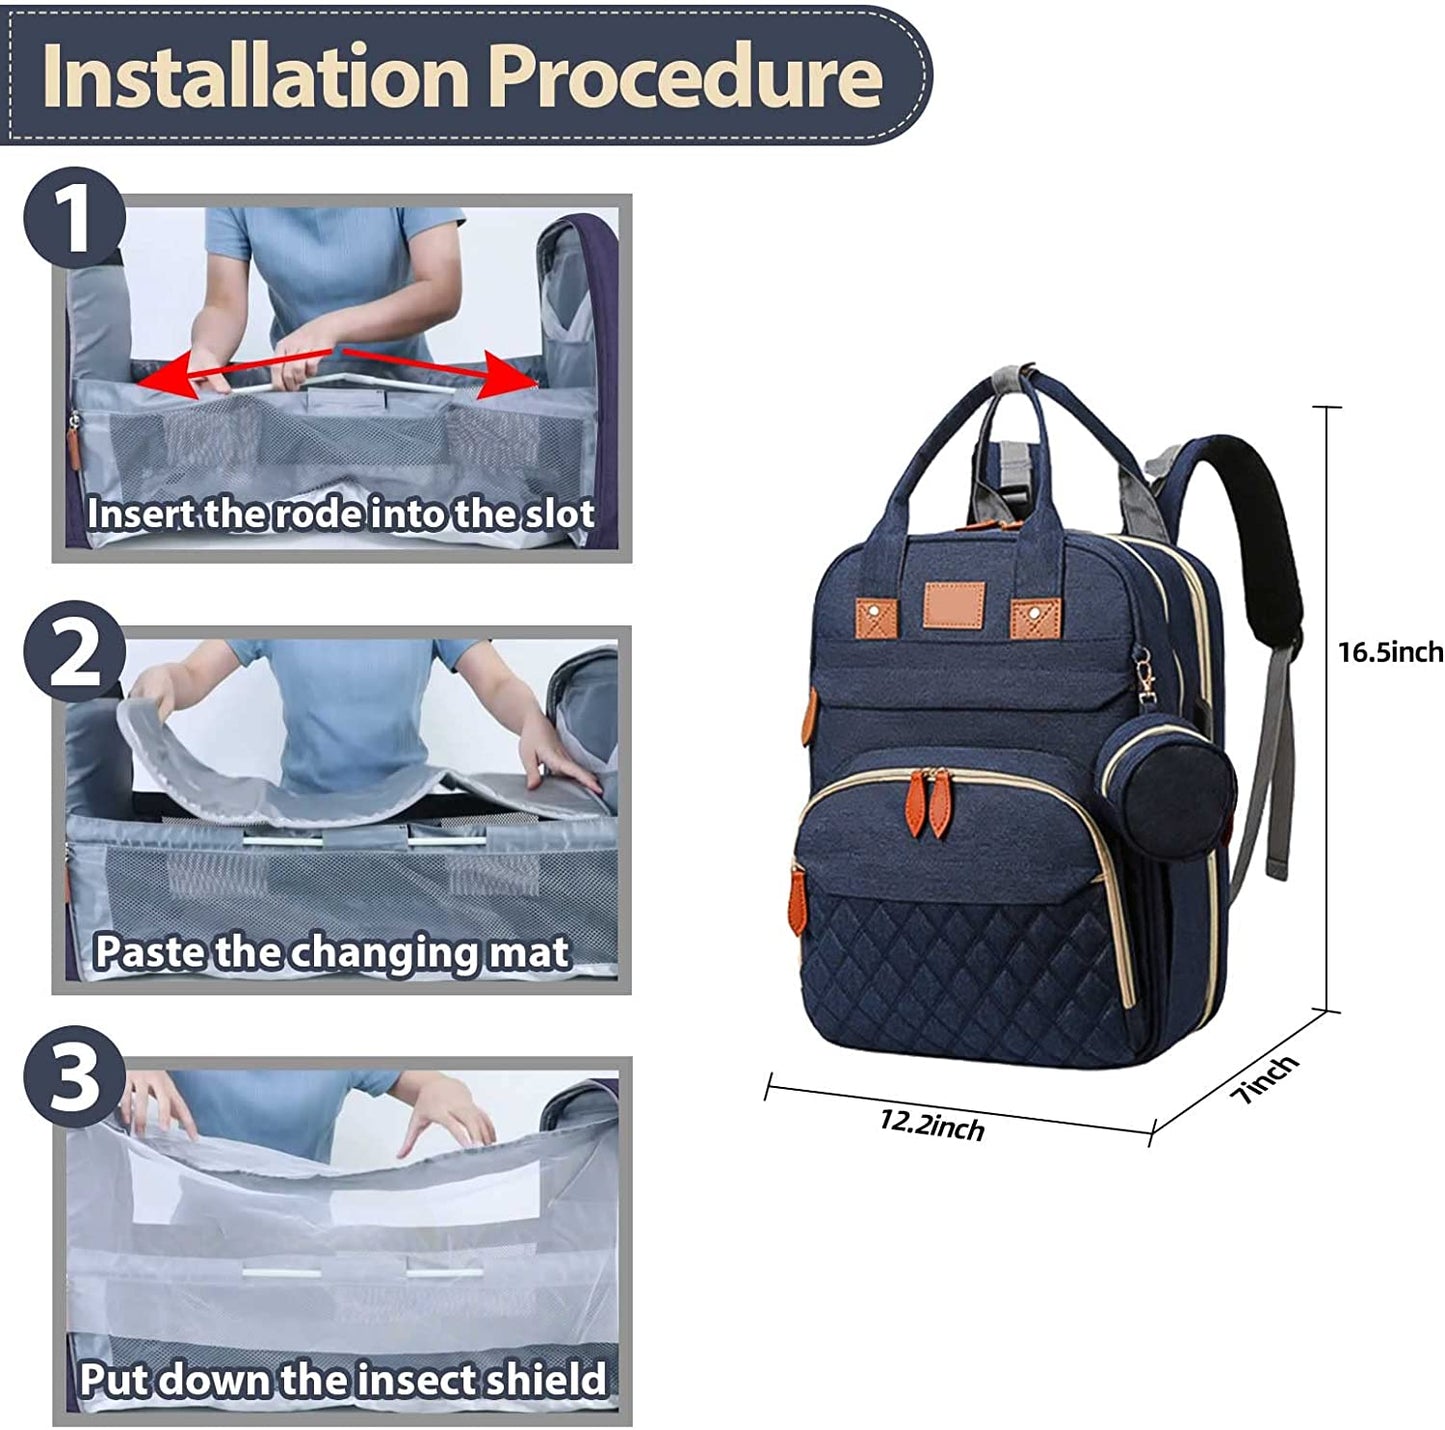 Diaper backpack with multifunctional baby bags for parents 